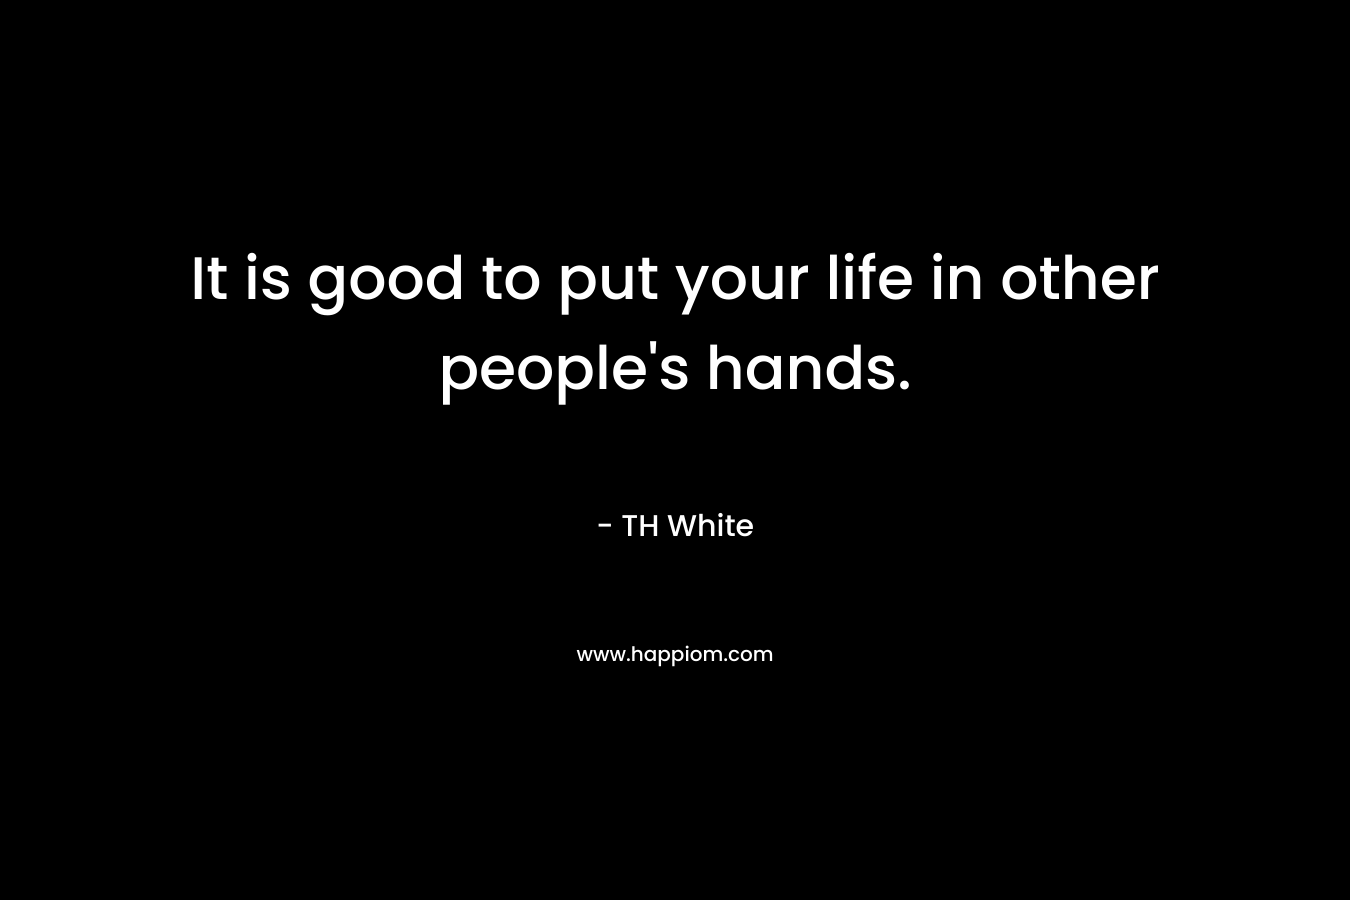 It is good to put your life in other people’s hands. – TH White